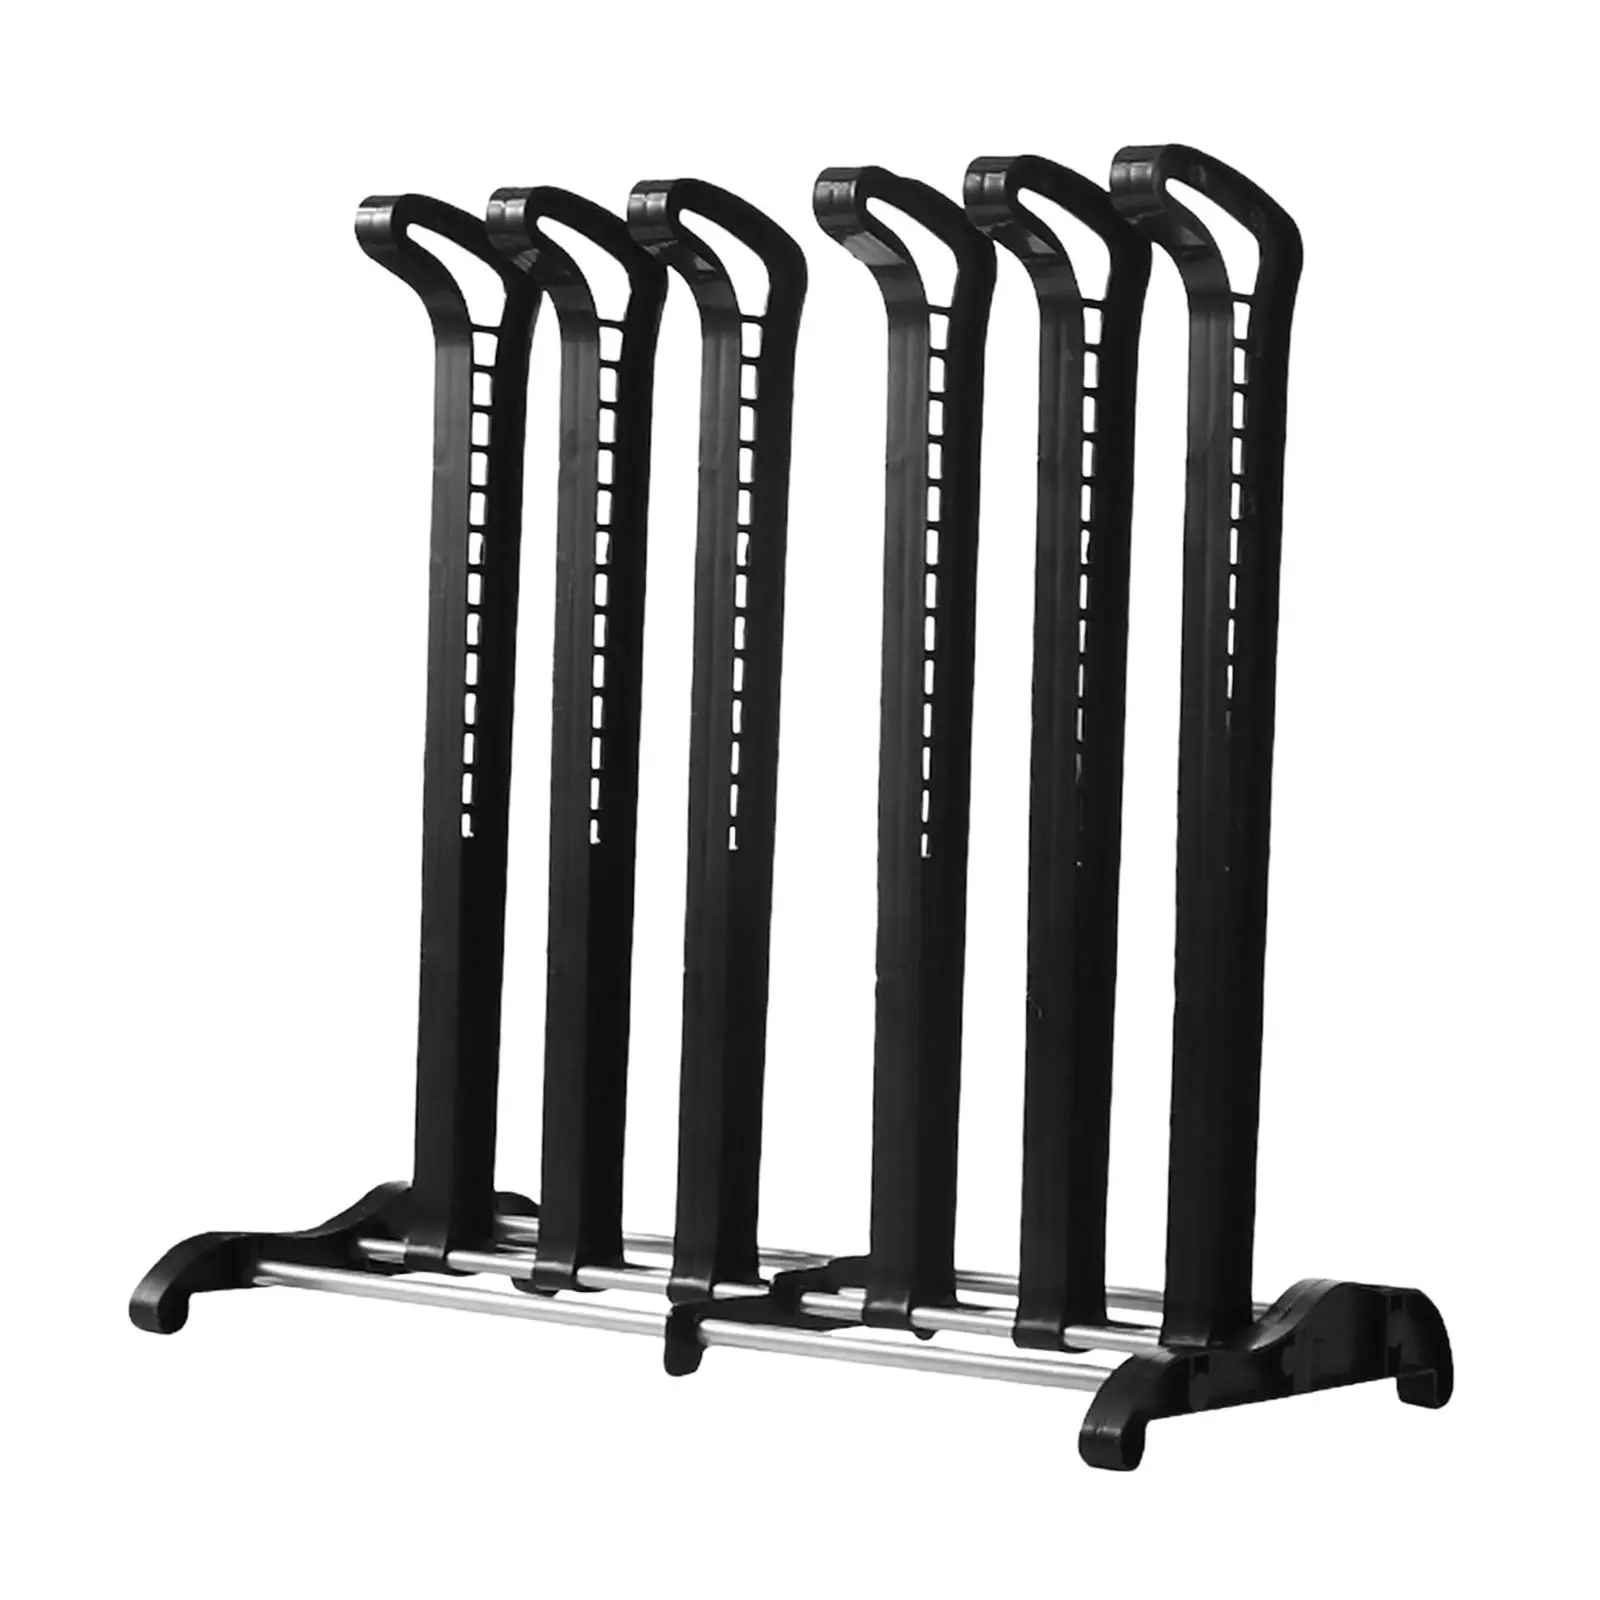 Boots Rack Accessories Shoe Stand Tool Free Standing Shoe Rack for Patio Outdoor Closet Hallway Bedroom Tall Boots Storage